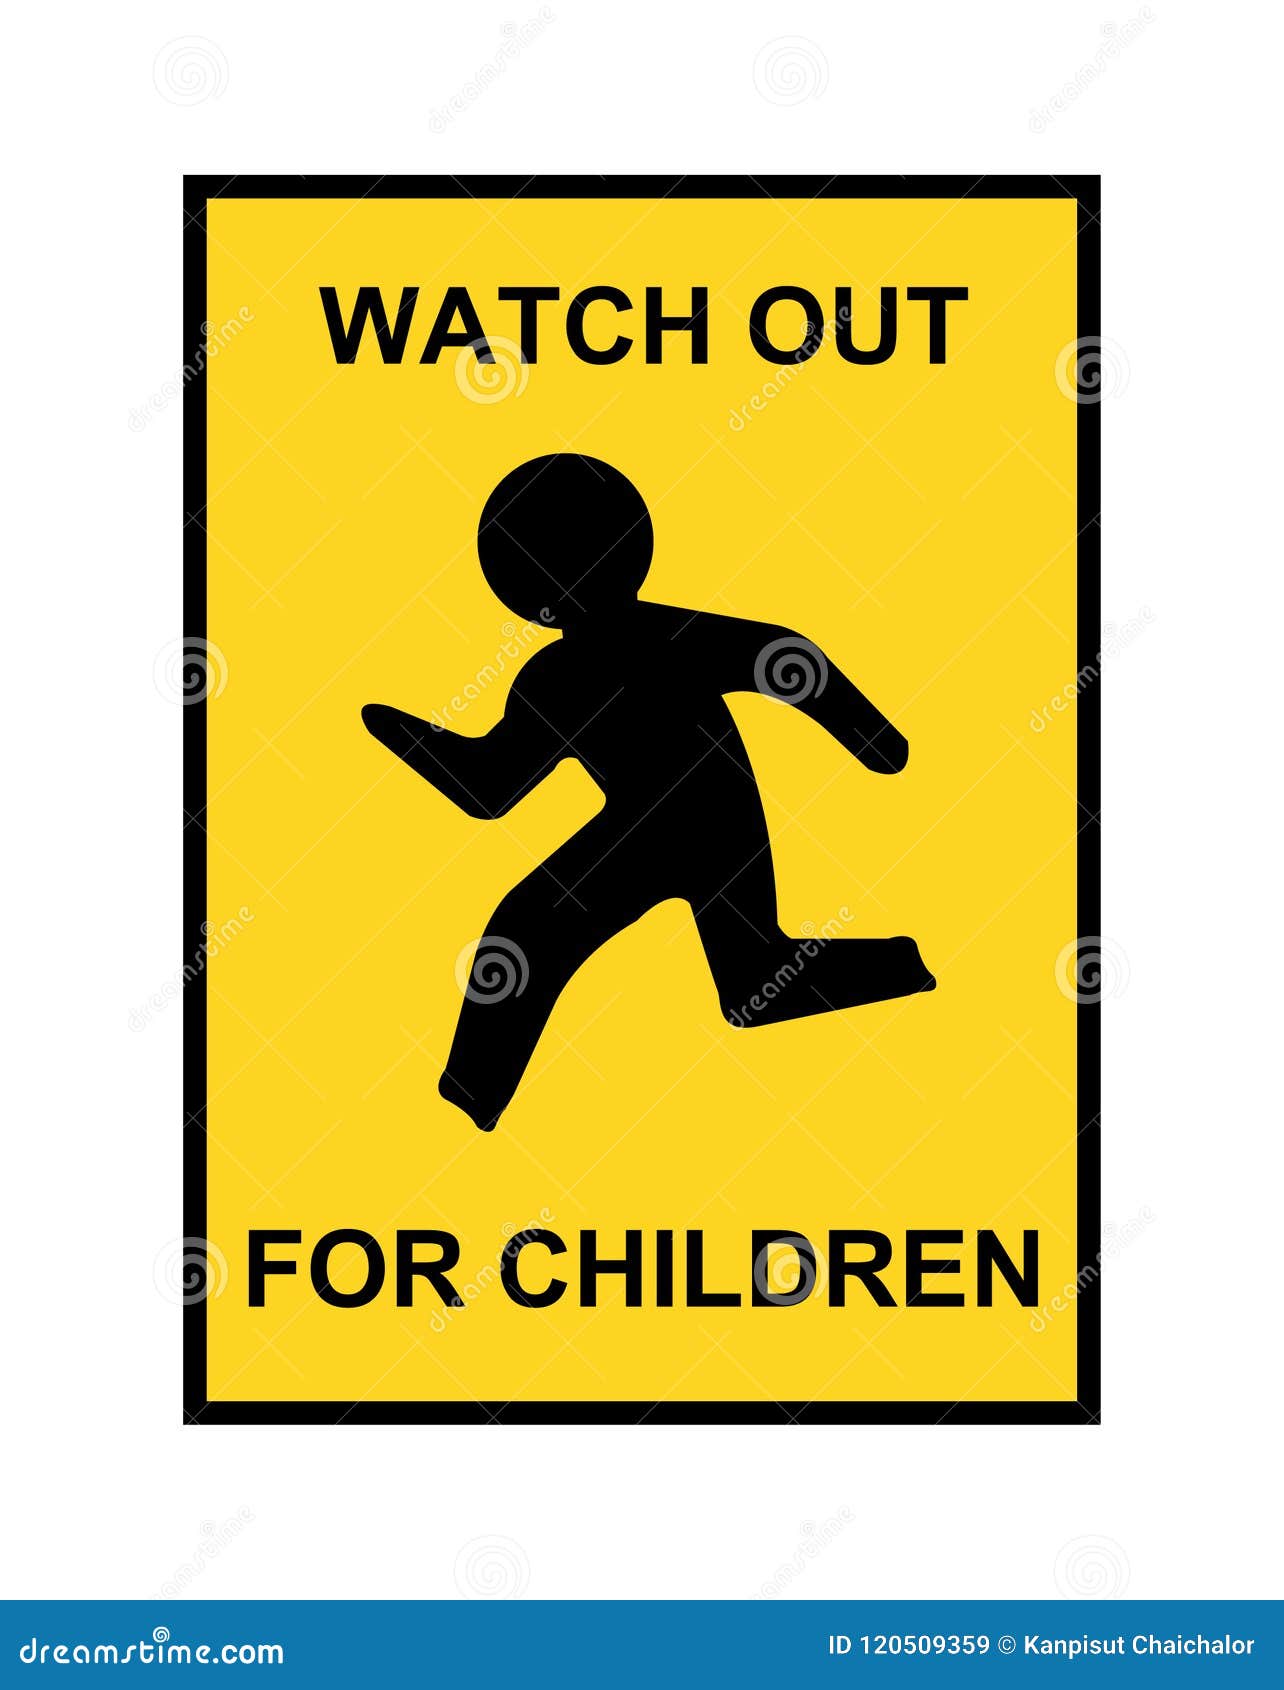 Isolated Male Kid Playing with Fire. Do Not Play with Fire Warning Sign  Stock Vector - Illustration of match, emergency: 235538544